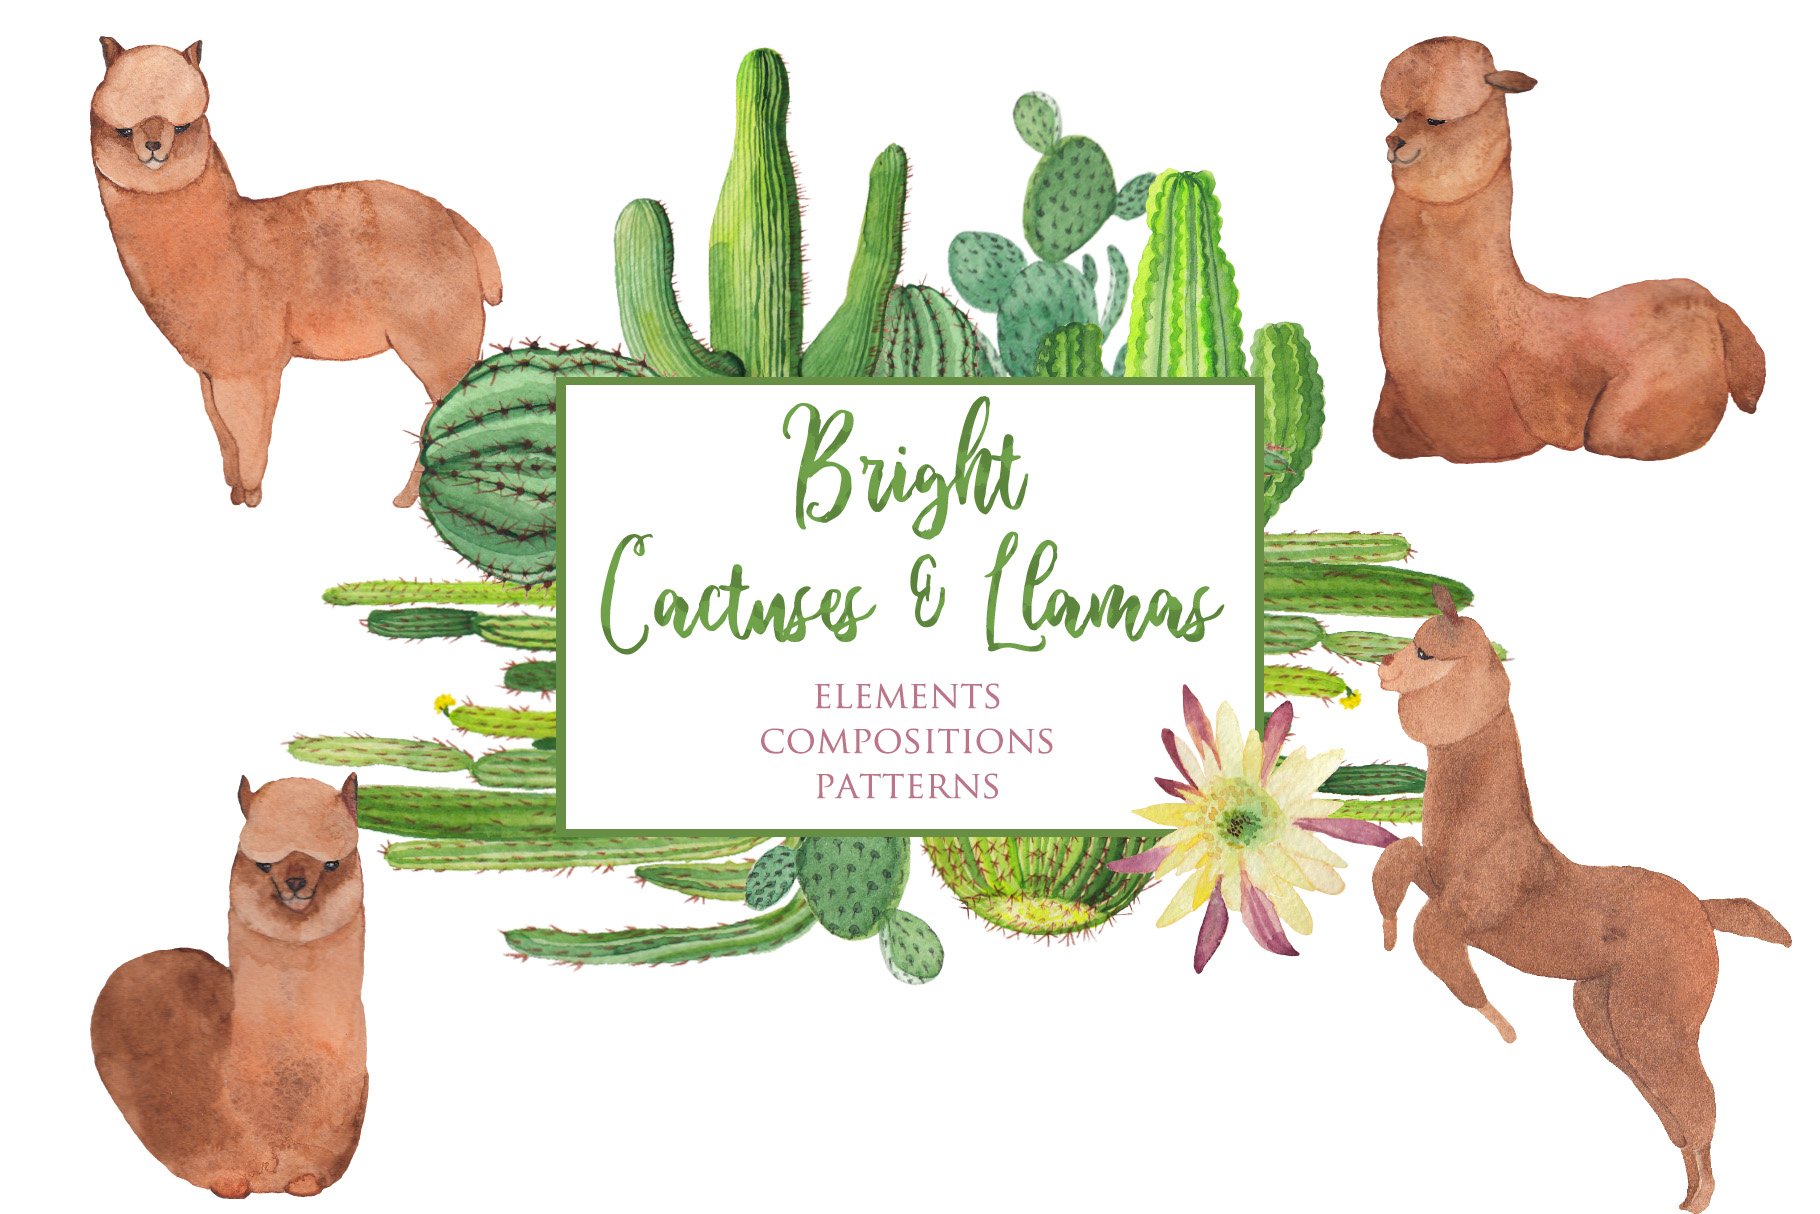 Bright Cactuses & Llamas Clipart cover image.